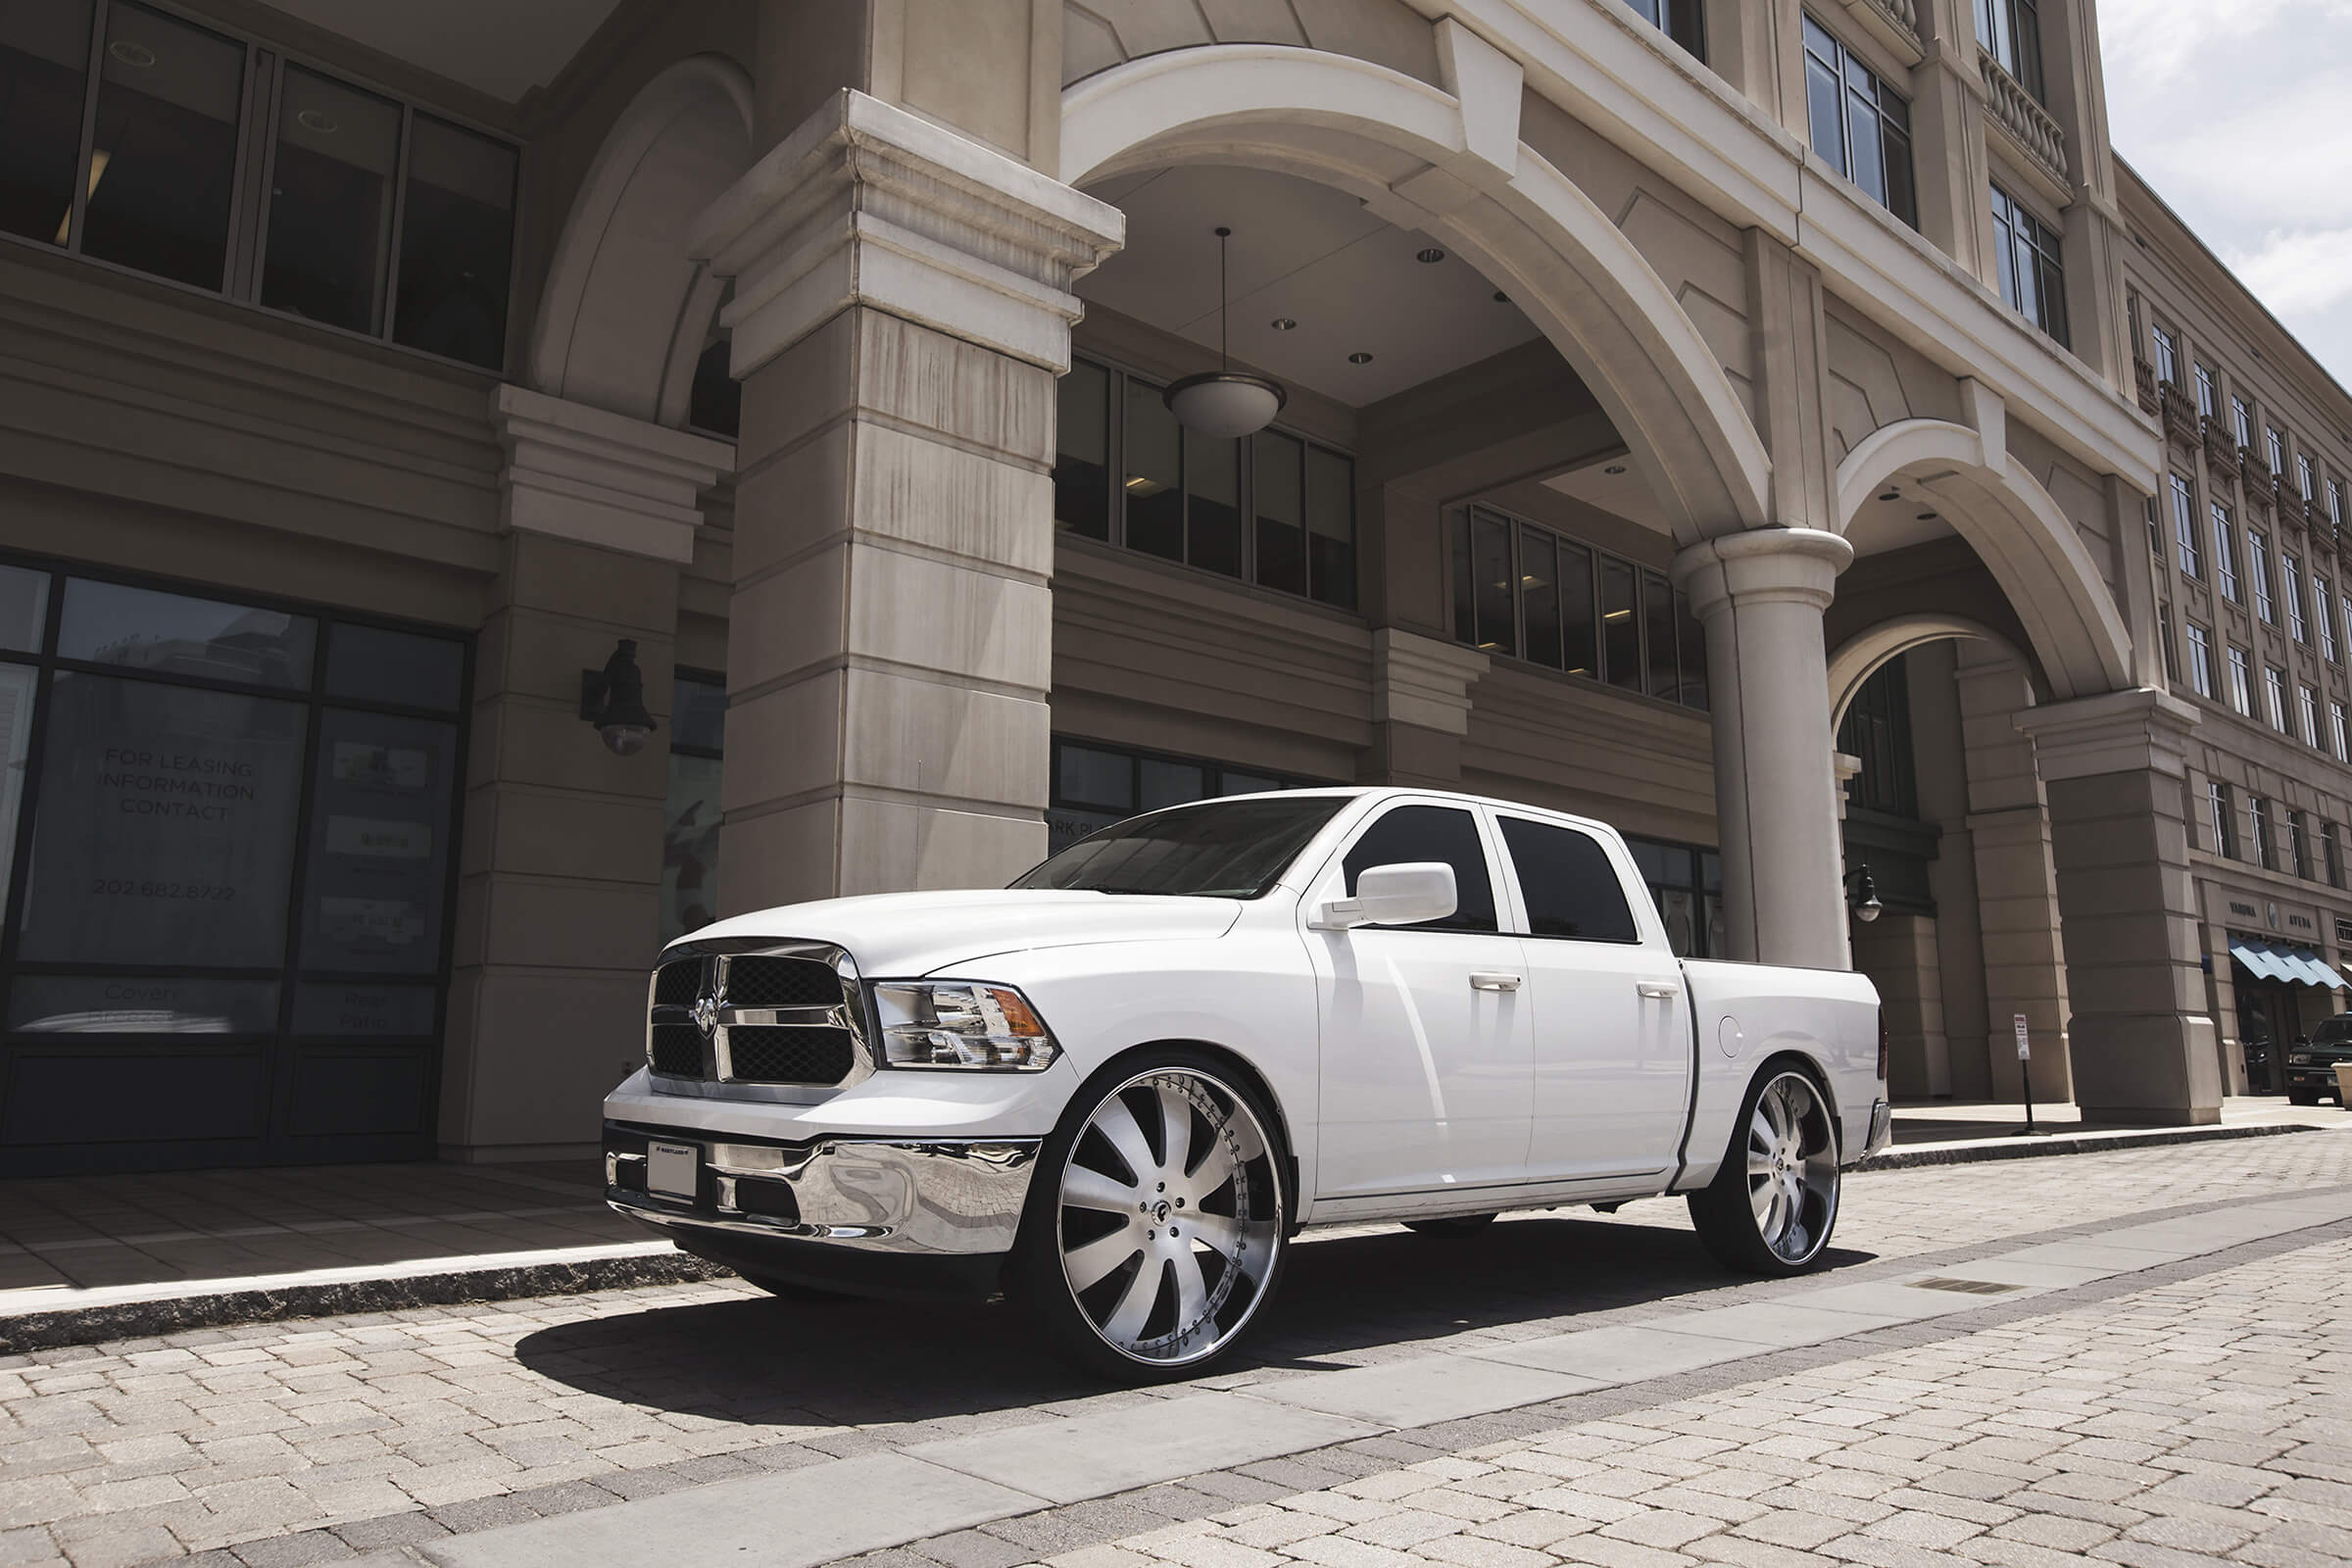 White Dodge Ram truck with 30